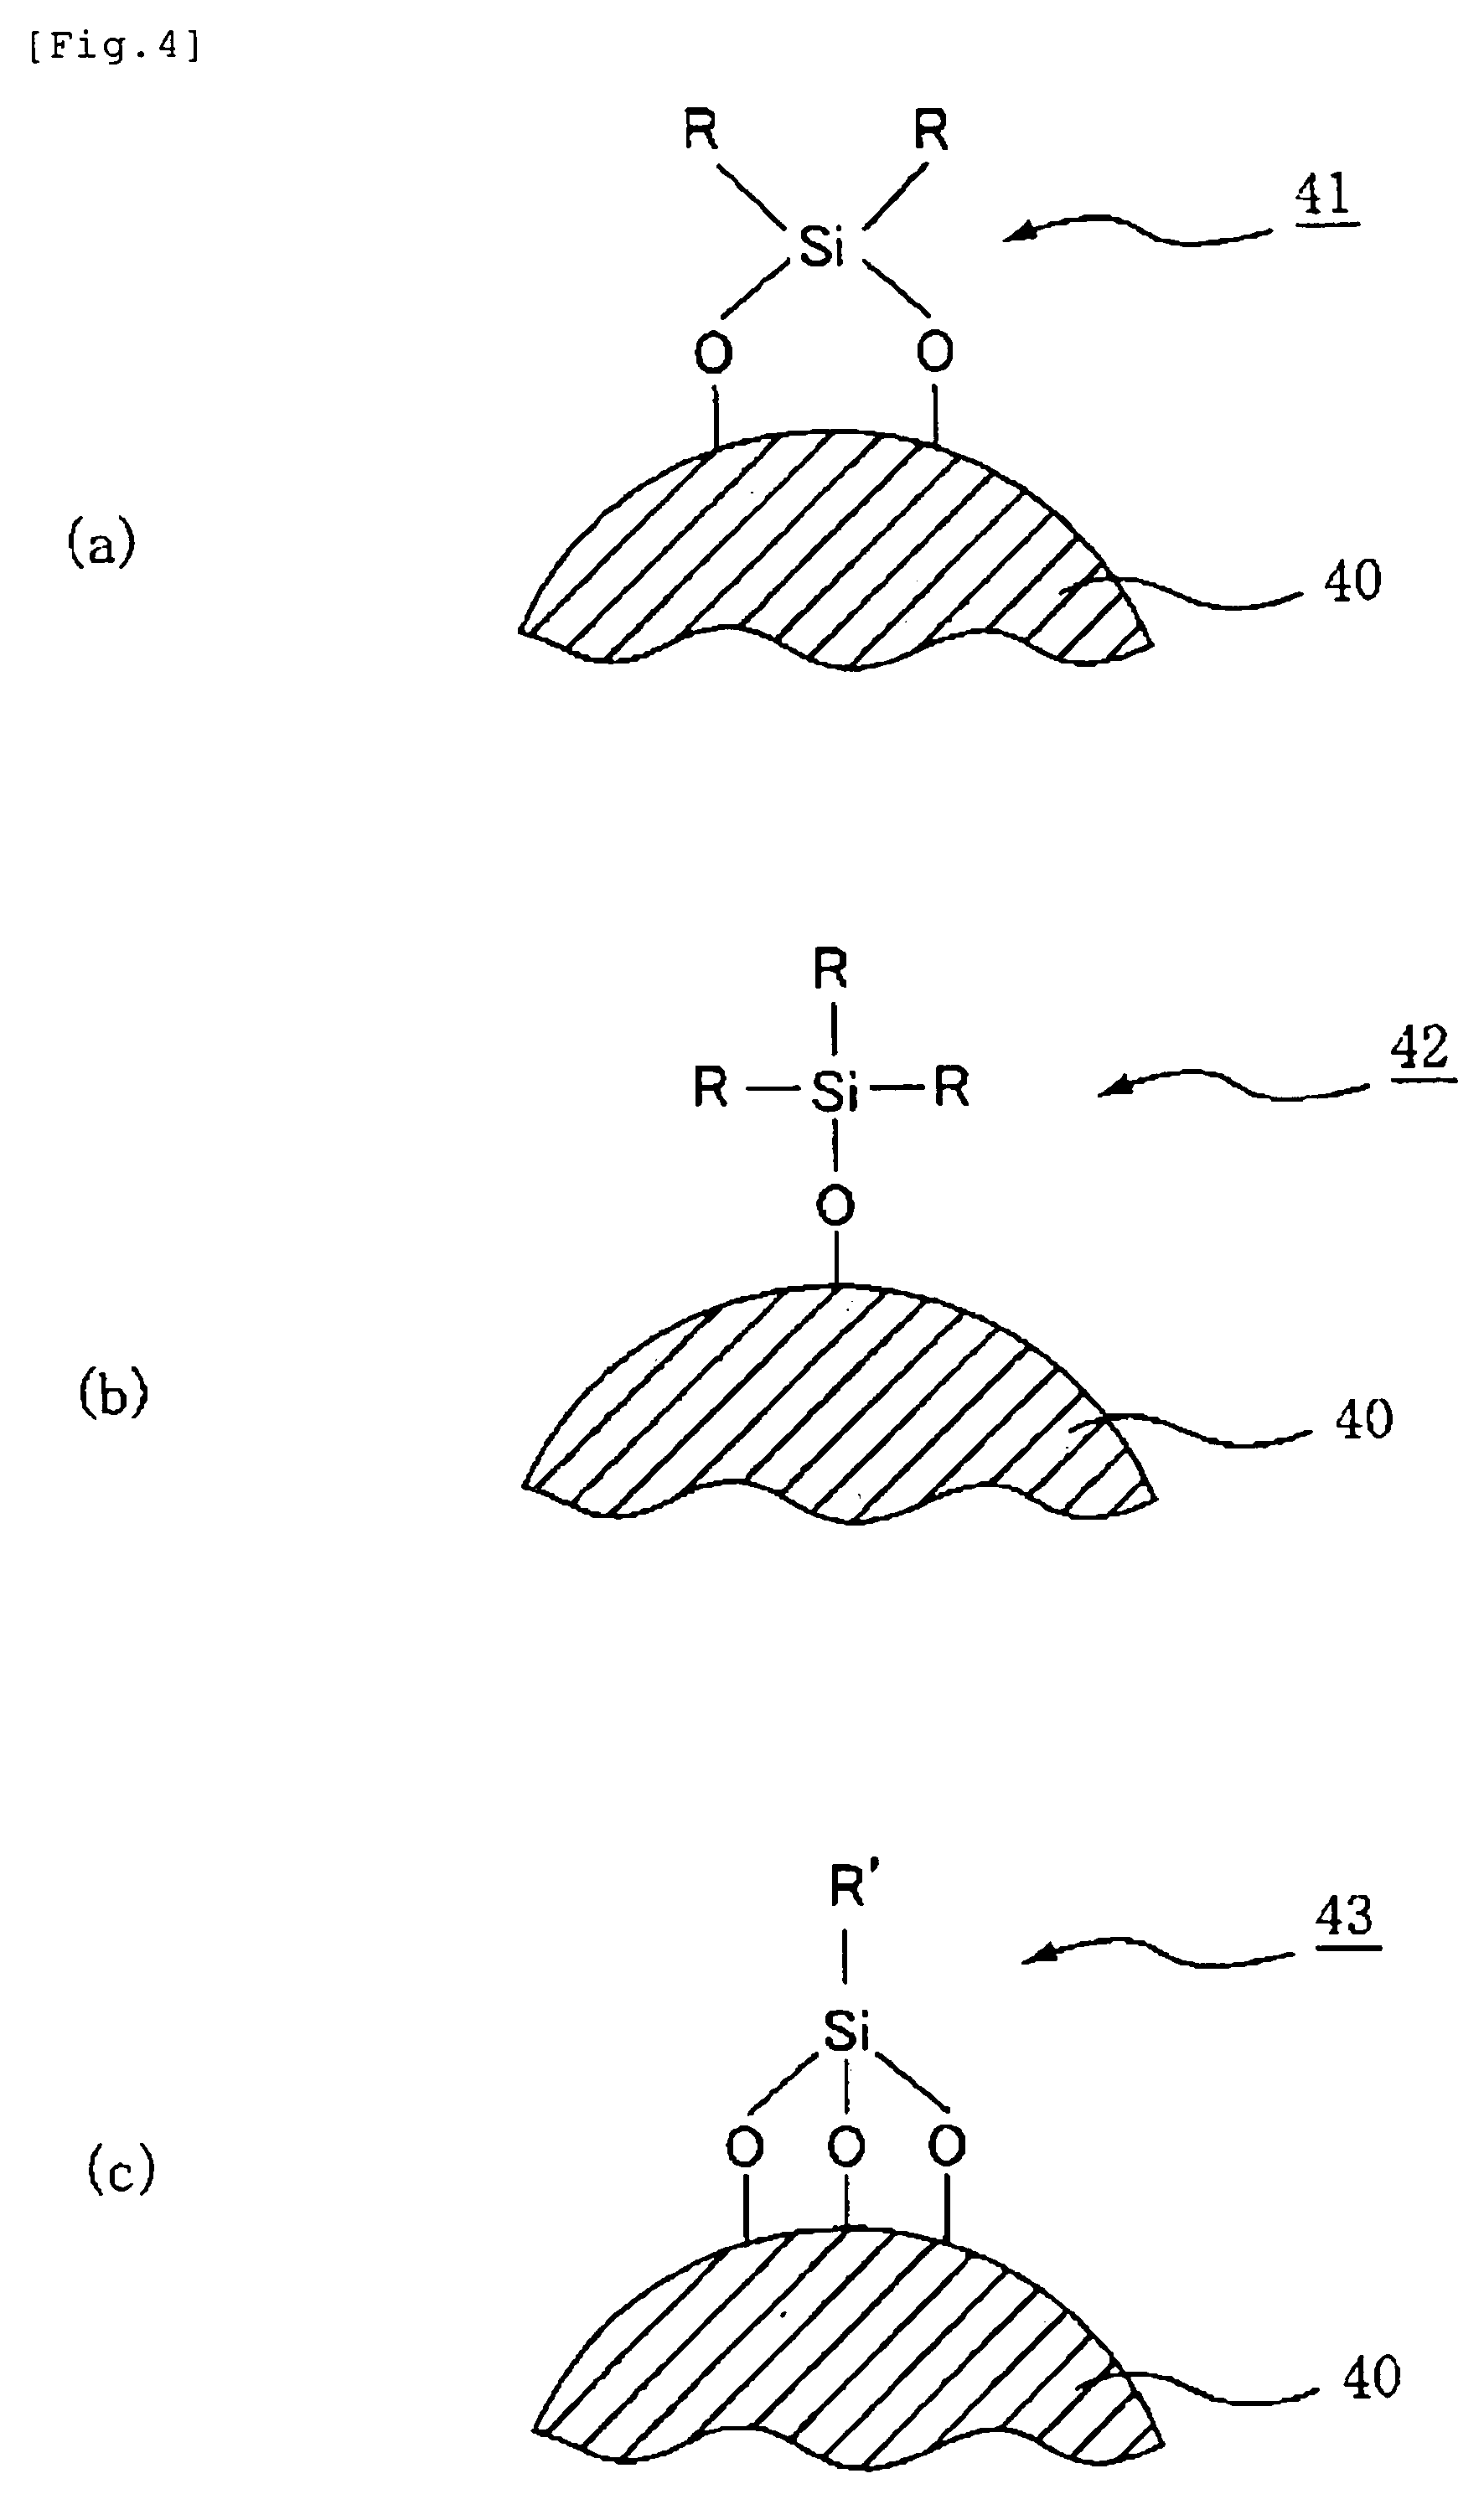 Themosetting Composition for Optical Semiconductor, Die Bond Material for Optical Semiconductor Device, Underfill Material for Optical Semiconductor Device, Sealing Agent for Optical Semiconductor Device, and Optical Semiconductor Device